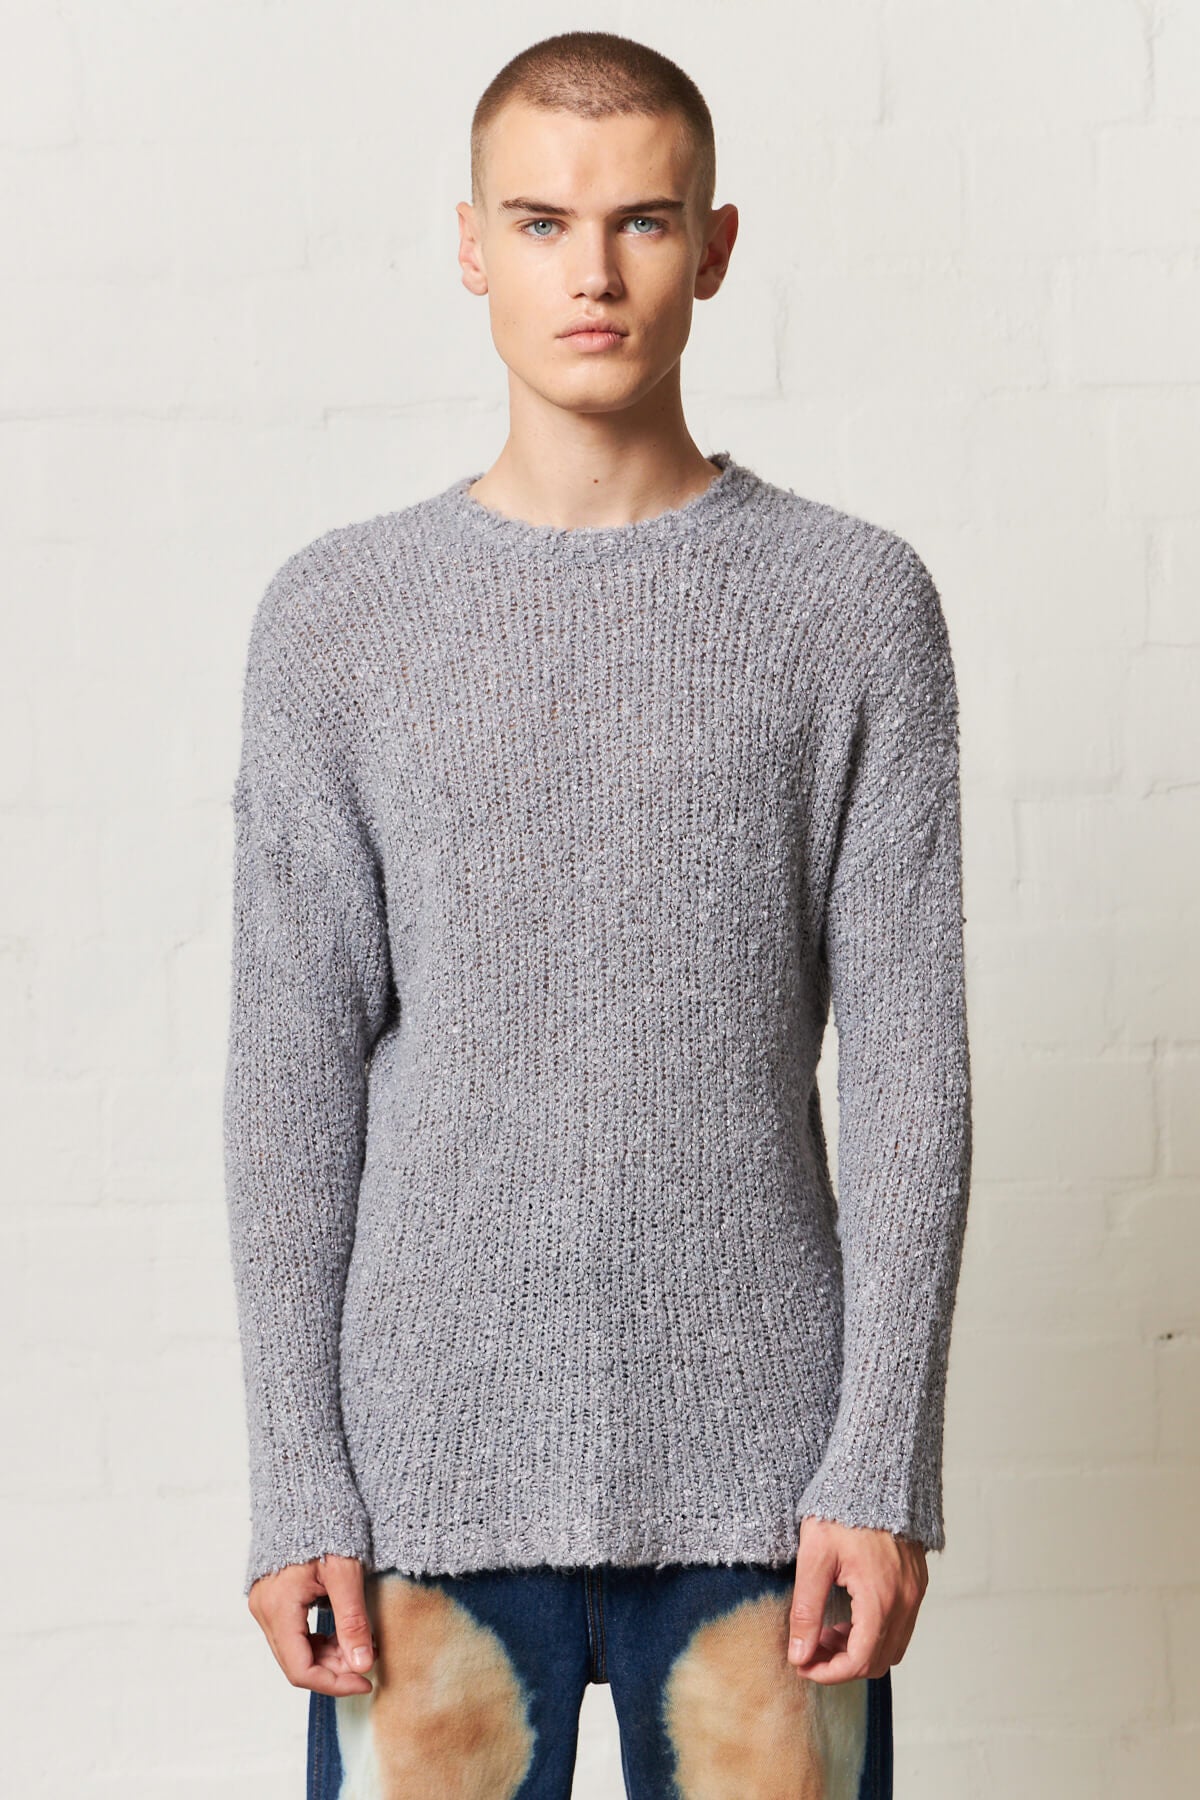 popove(美品) OUR LEGACY popover knit 48 - トップス